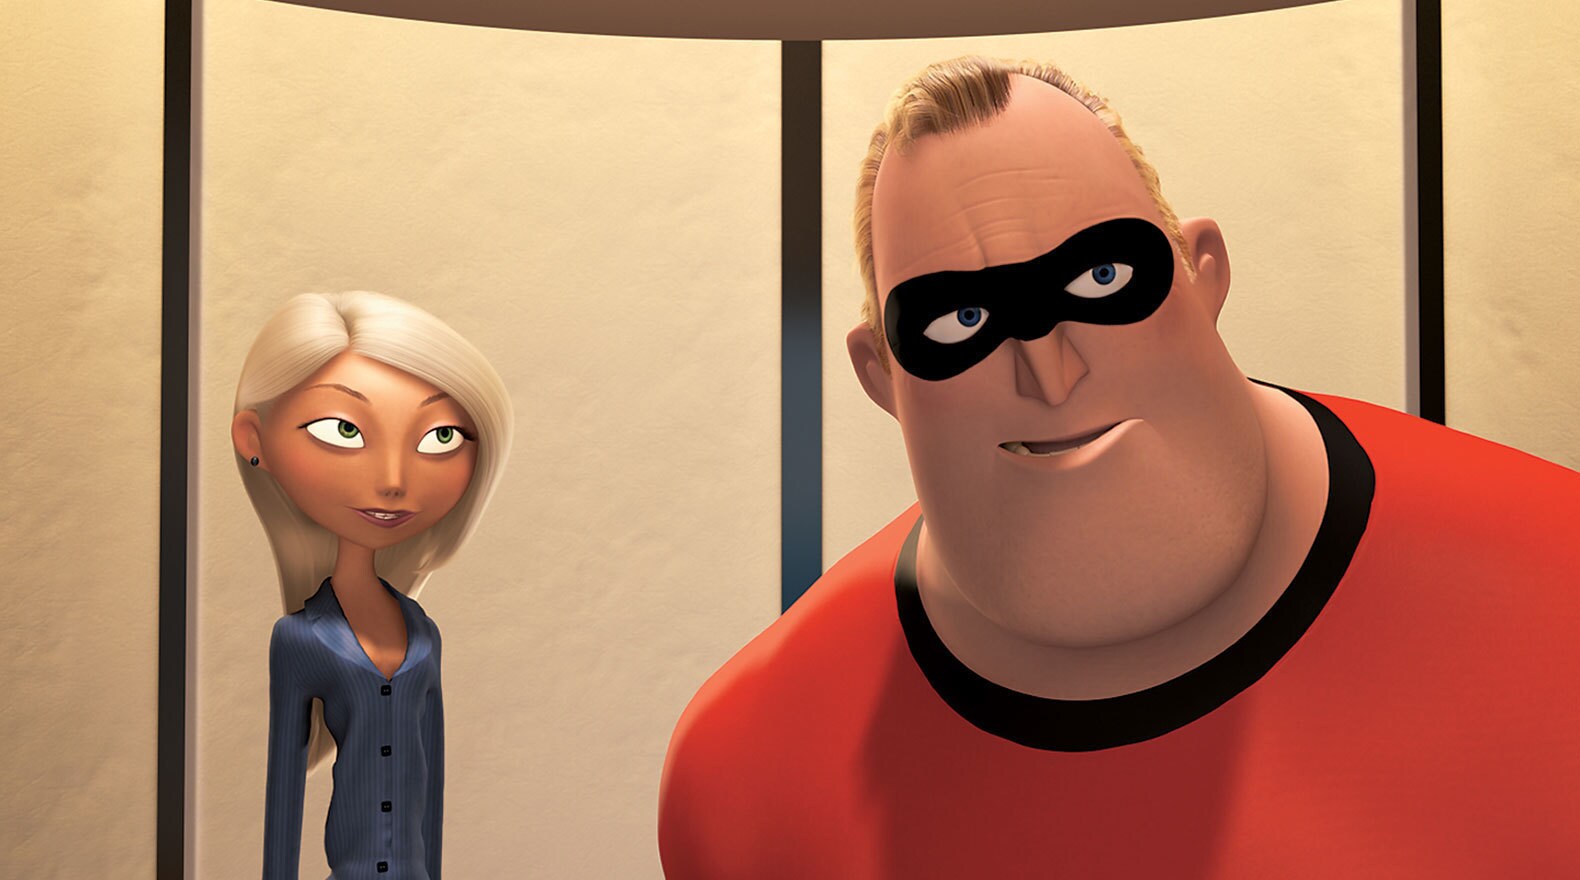 Mr. Incredible ready for his next assignment in "The Incredibles"...